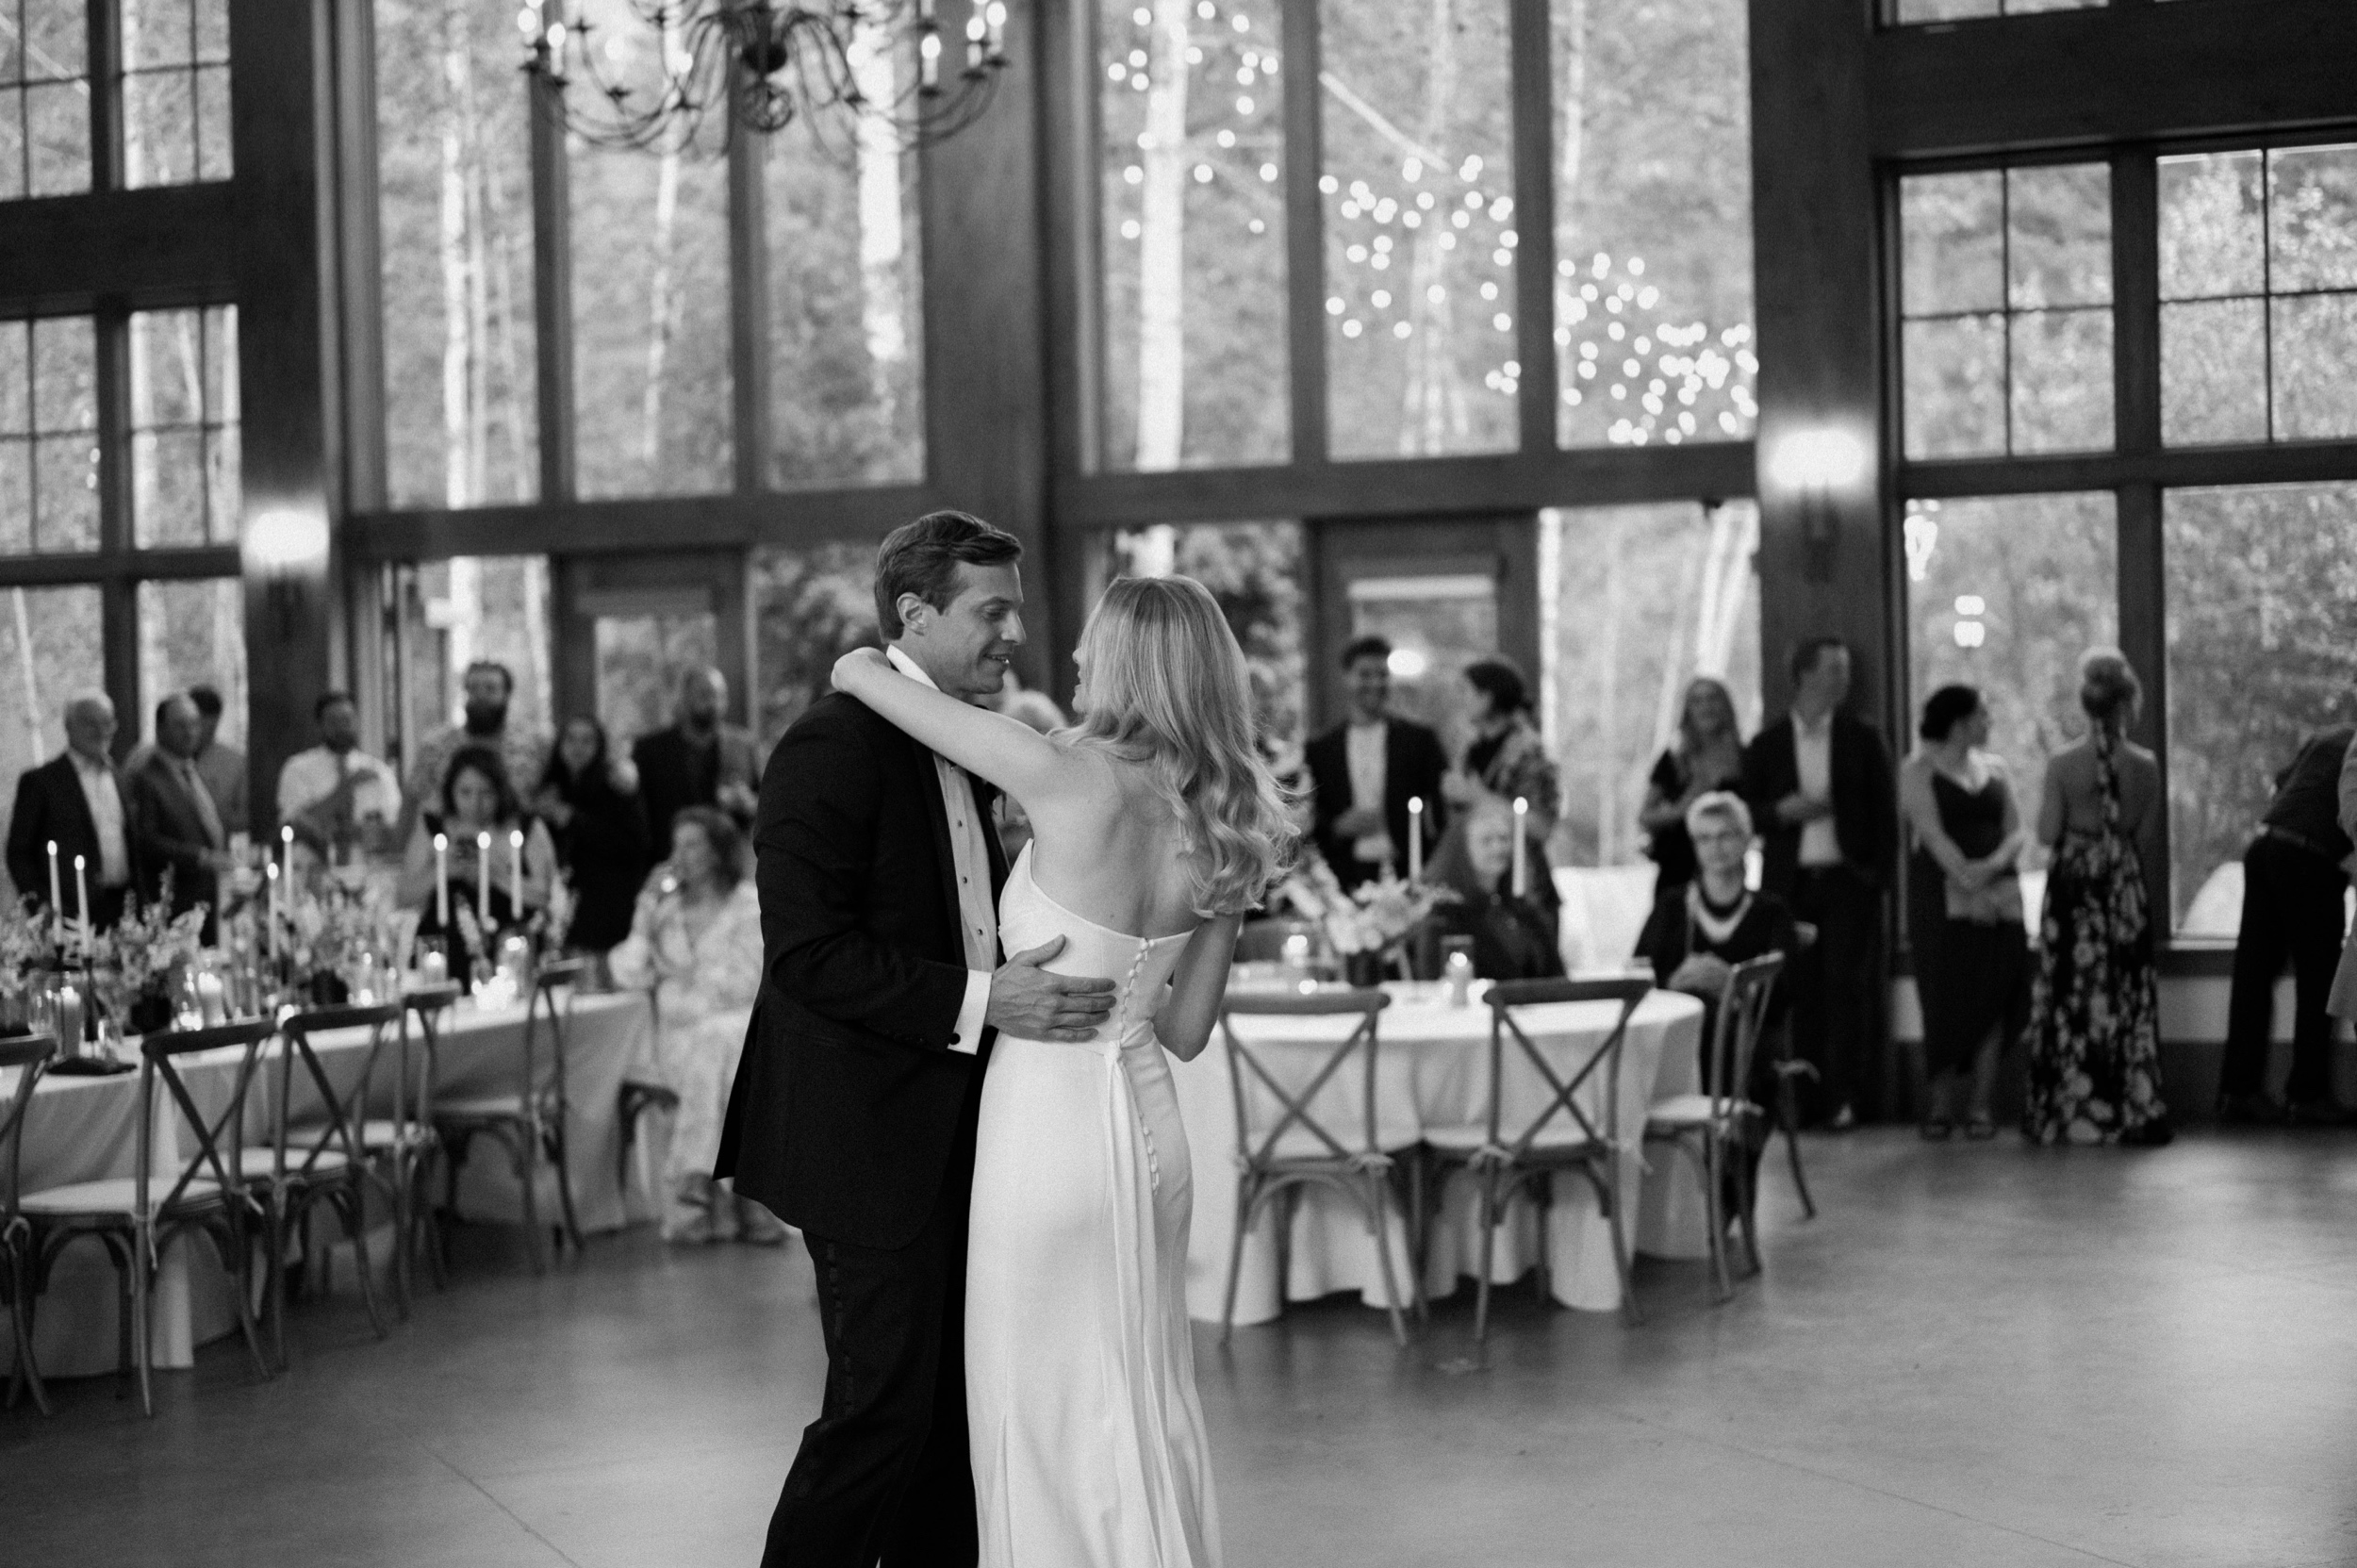 A bride and groom dance to their first dance at their wedding in Vail, Colorado. Photo by Colorado wedding photographer Ashley Joyce.